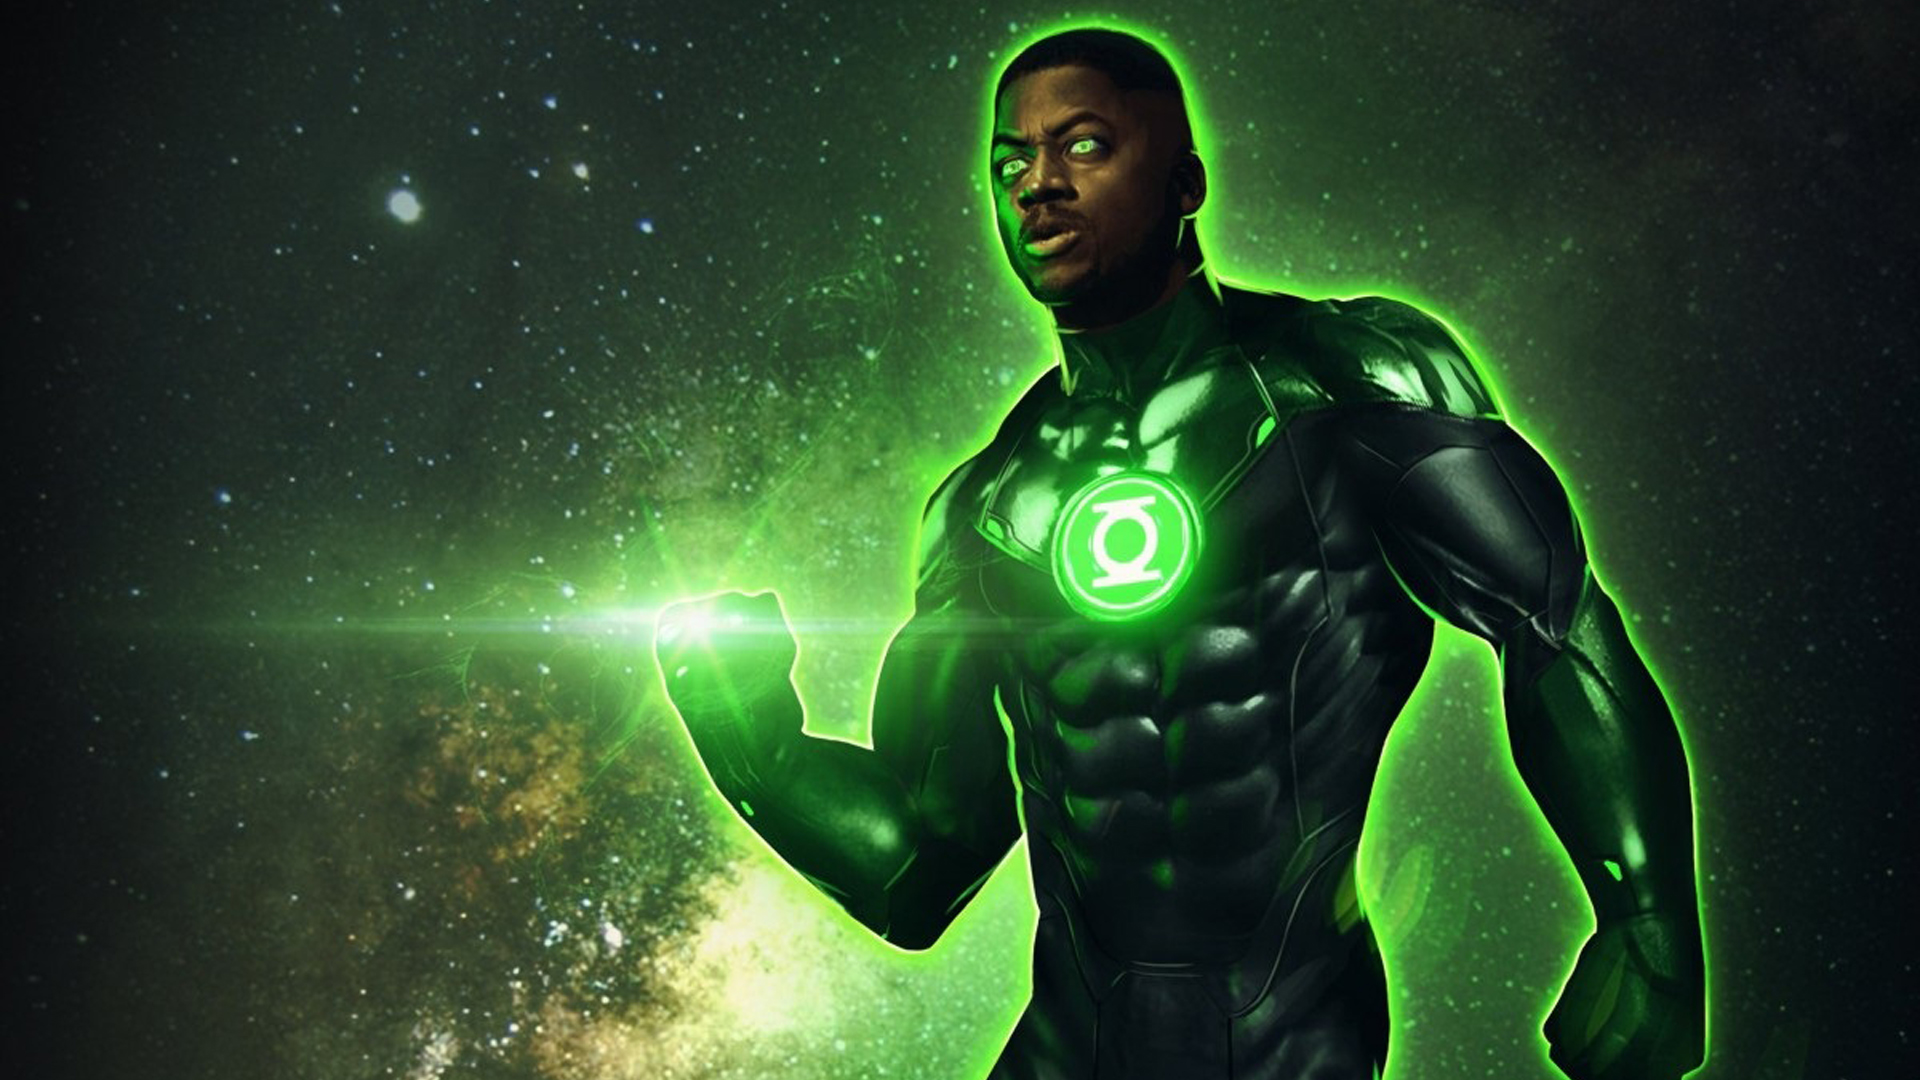 Zack Snyder's Justice League Green Lantern first picture revealed from cut scene